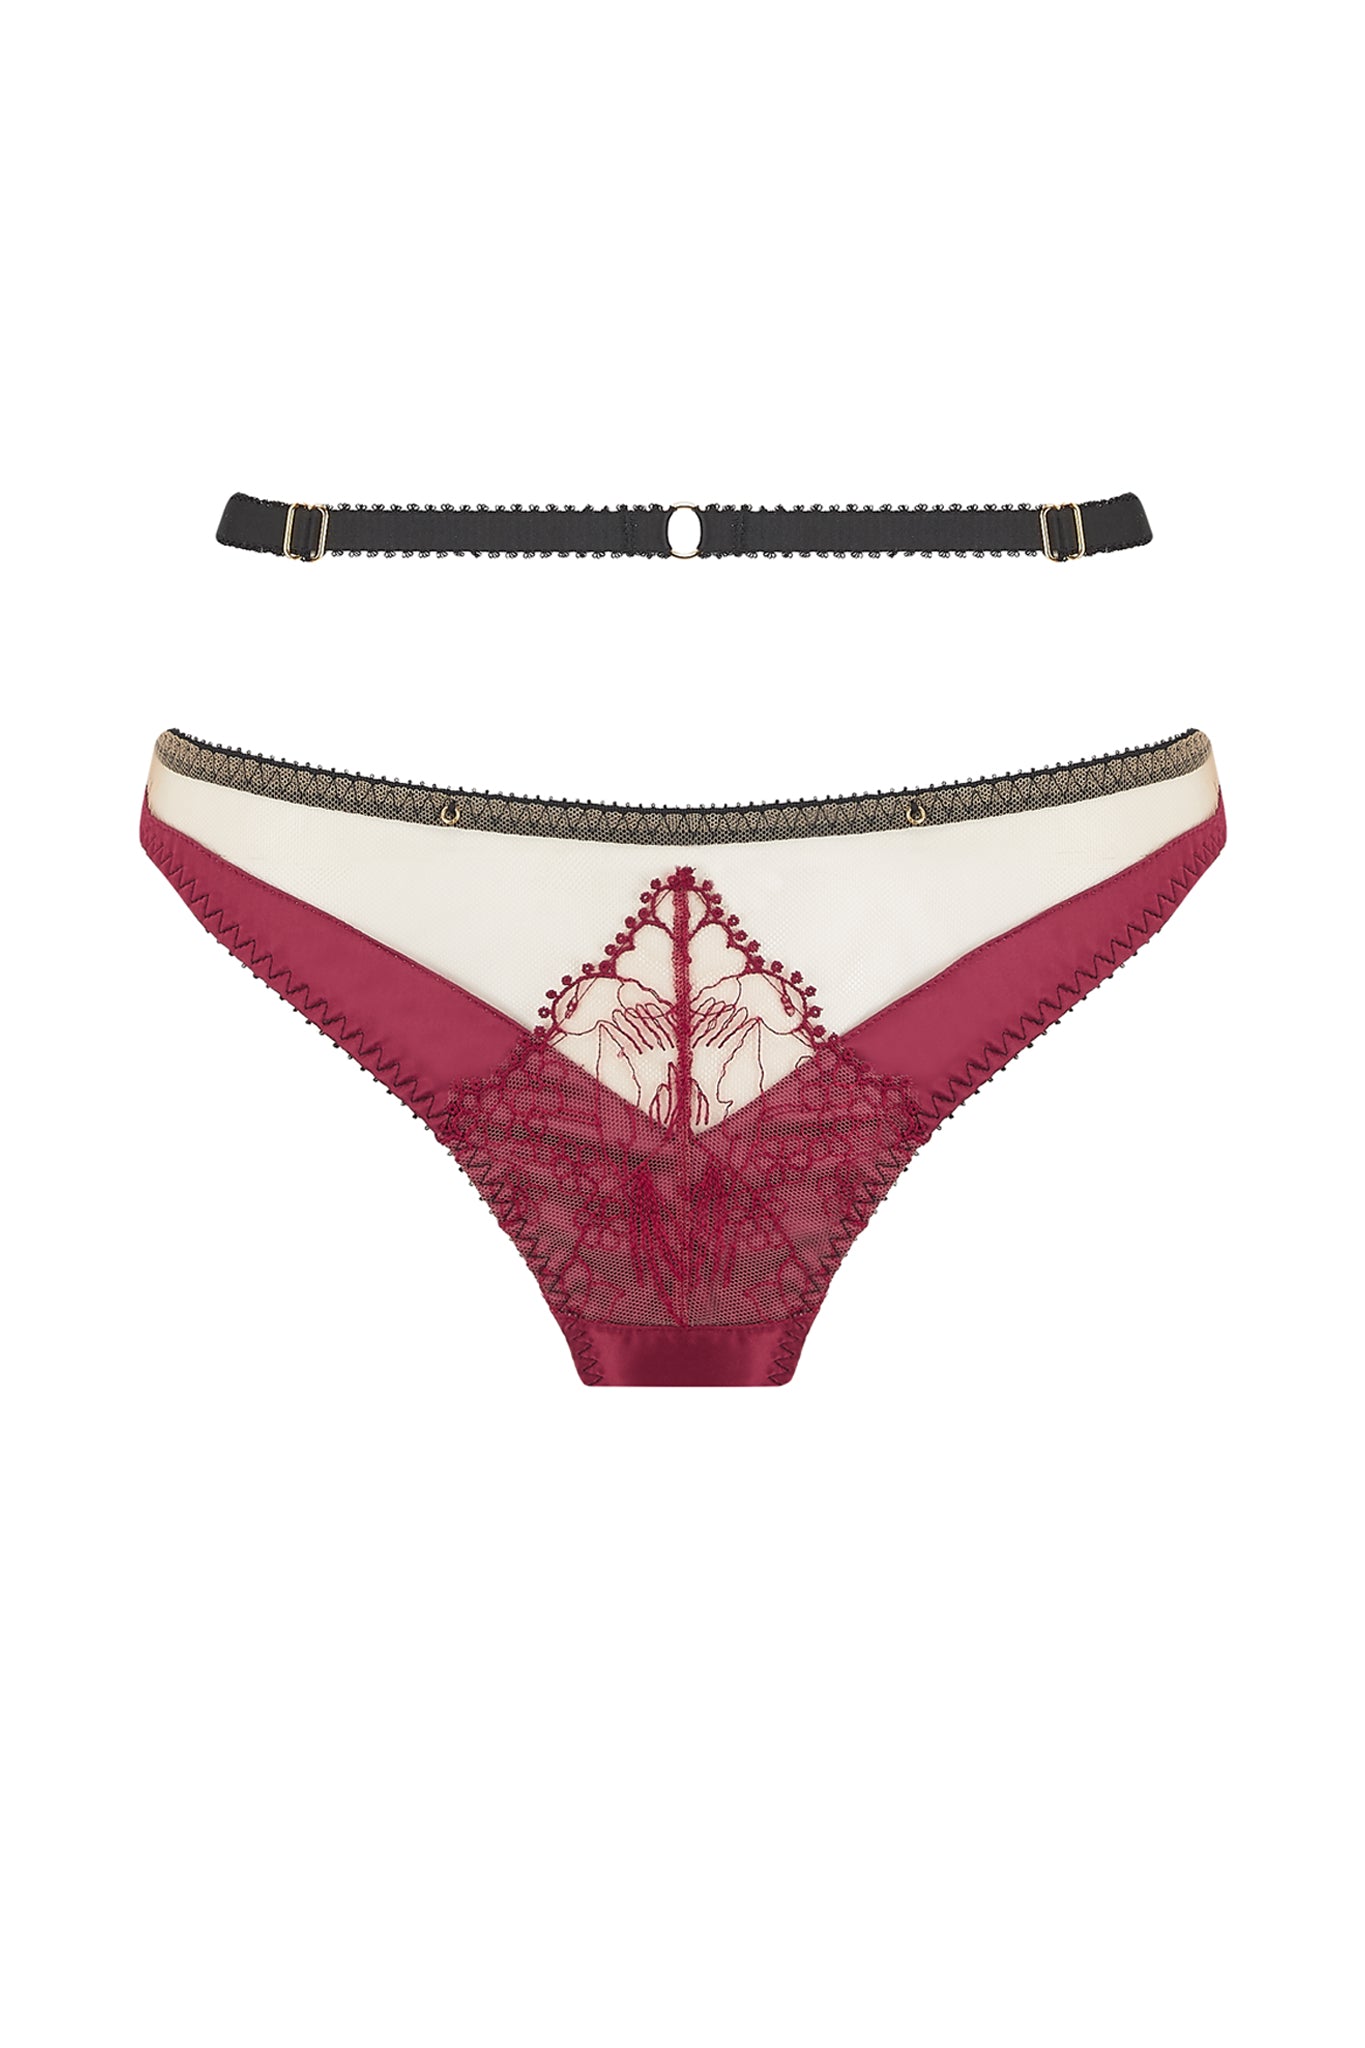 Lace Panties & Lace Thongs  Delivery All Over Canada - Romantique